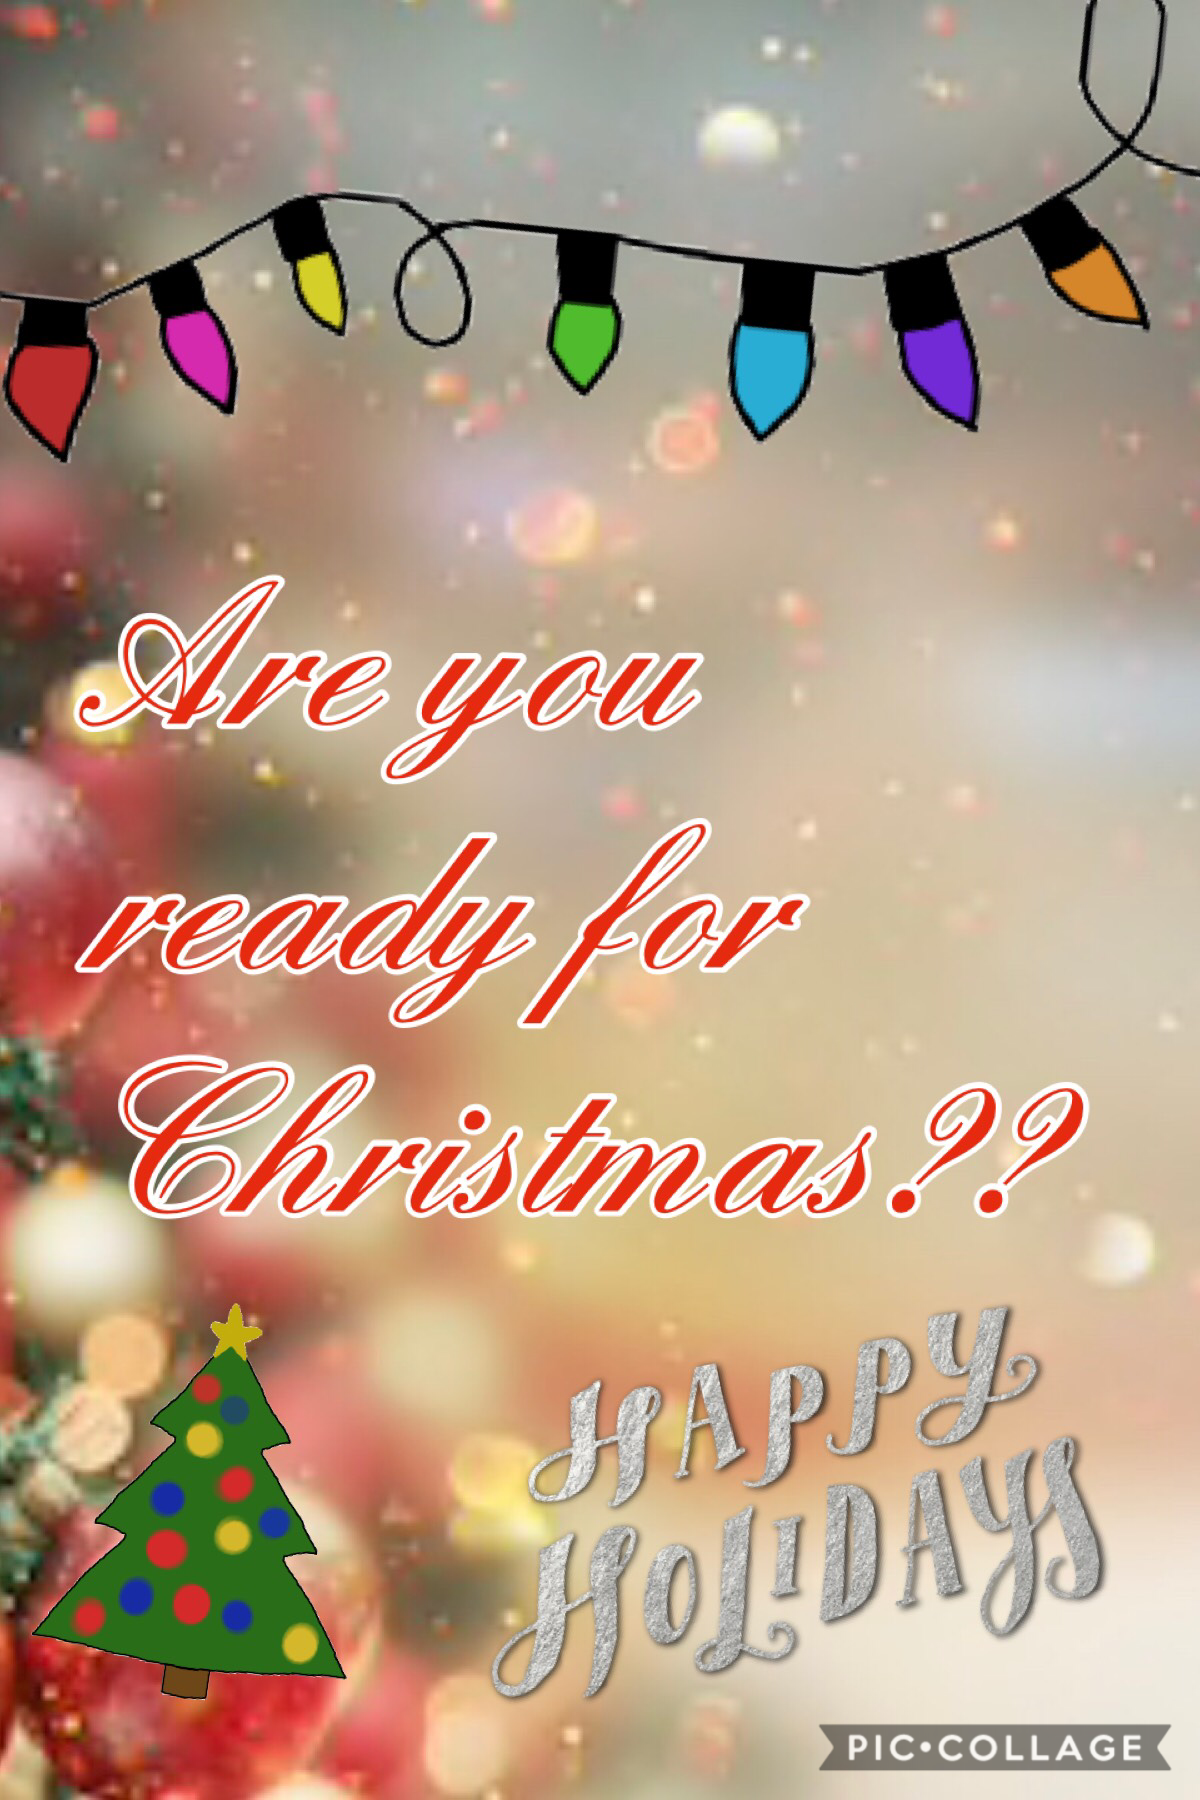 Are you ready for Christmas??